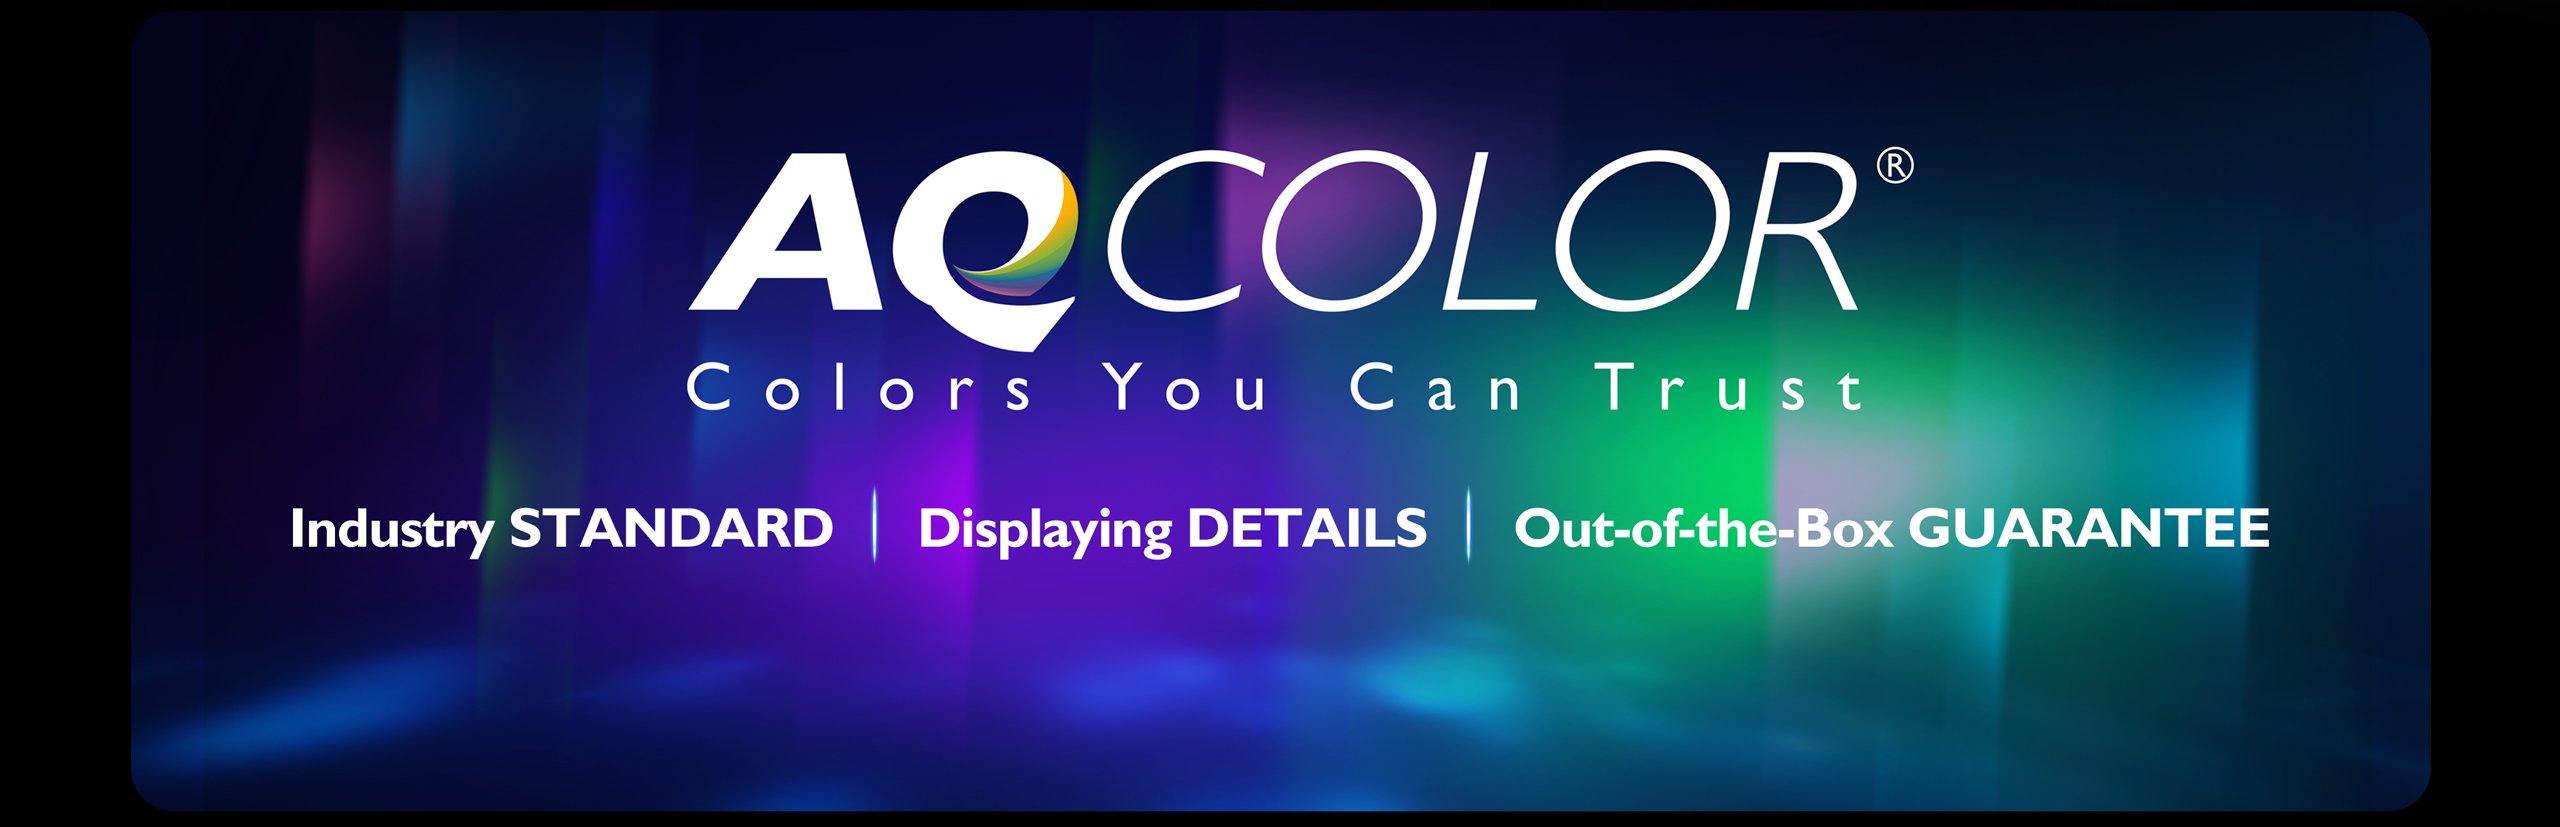 aqcolor technology comes with industry standard displaying details and out of the box gurantee